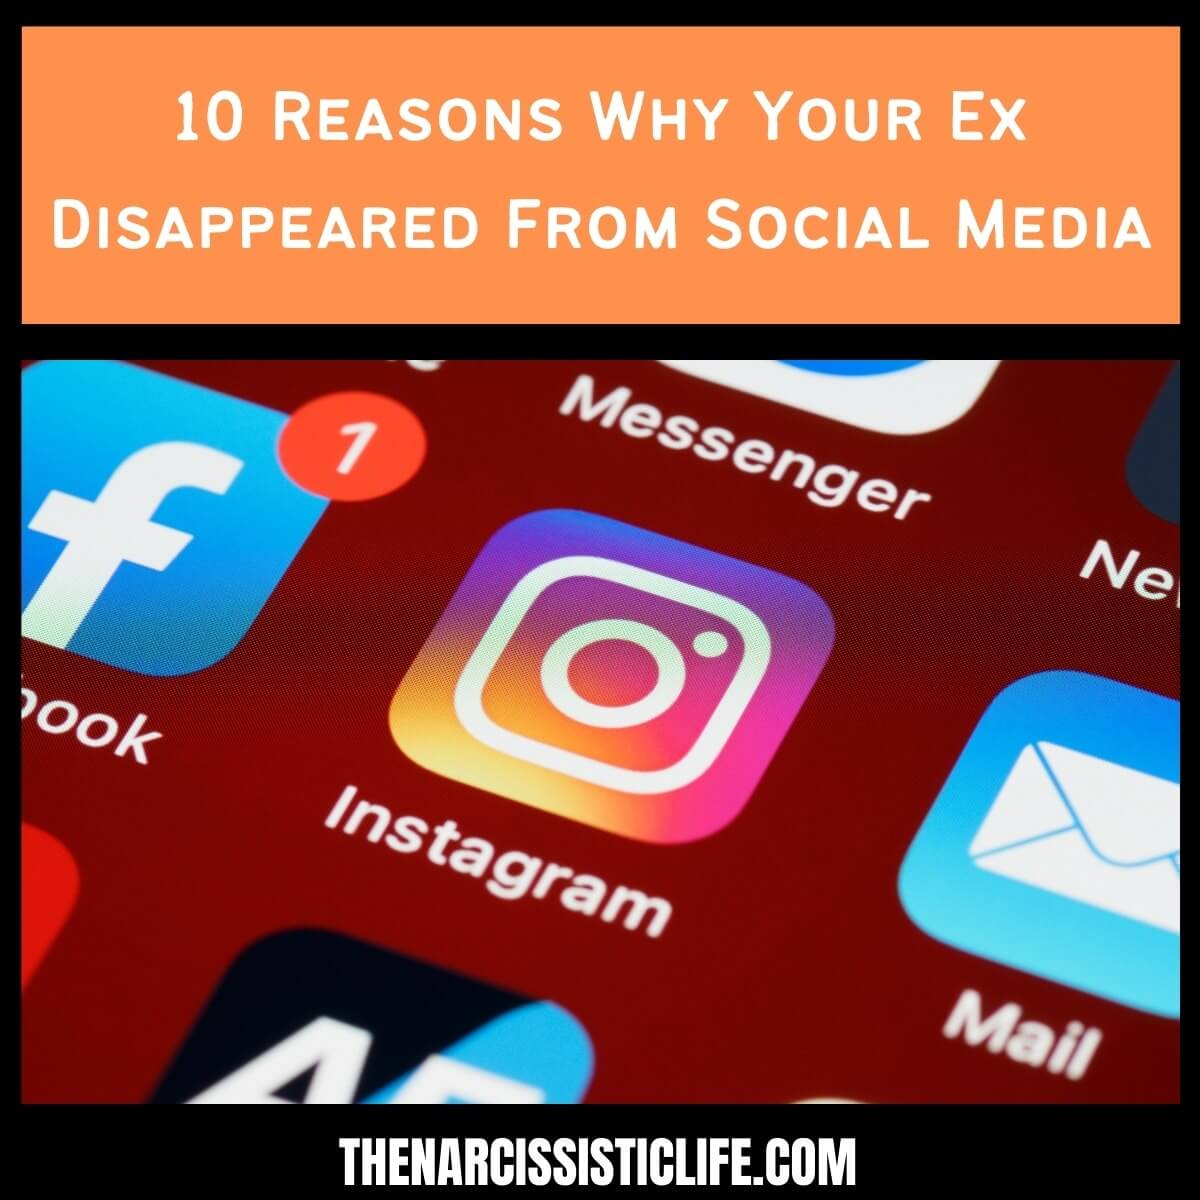 10 Reasons Why Your Ex Disappeared From Social Media